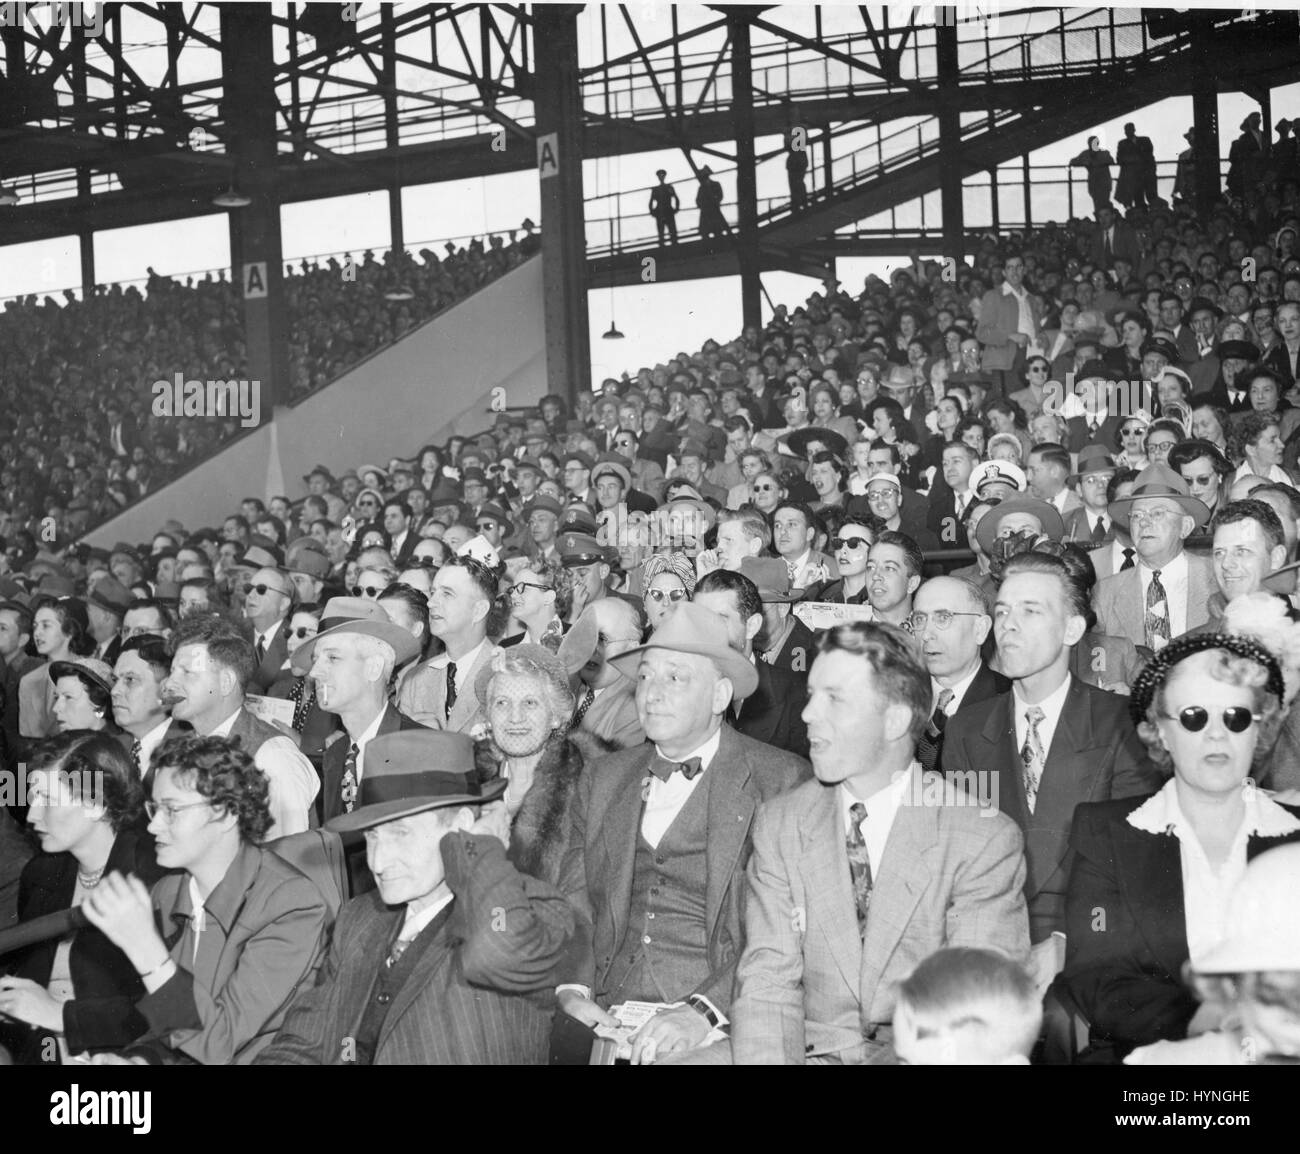 view-of-the-crowd-in-griffith-stadium-at-opening-game-of-the-1950-HYNGHE.jpg